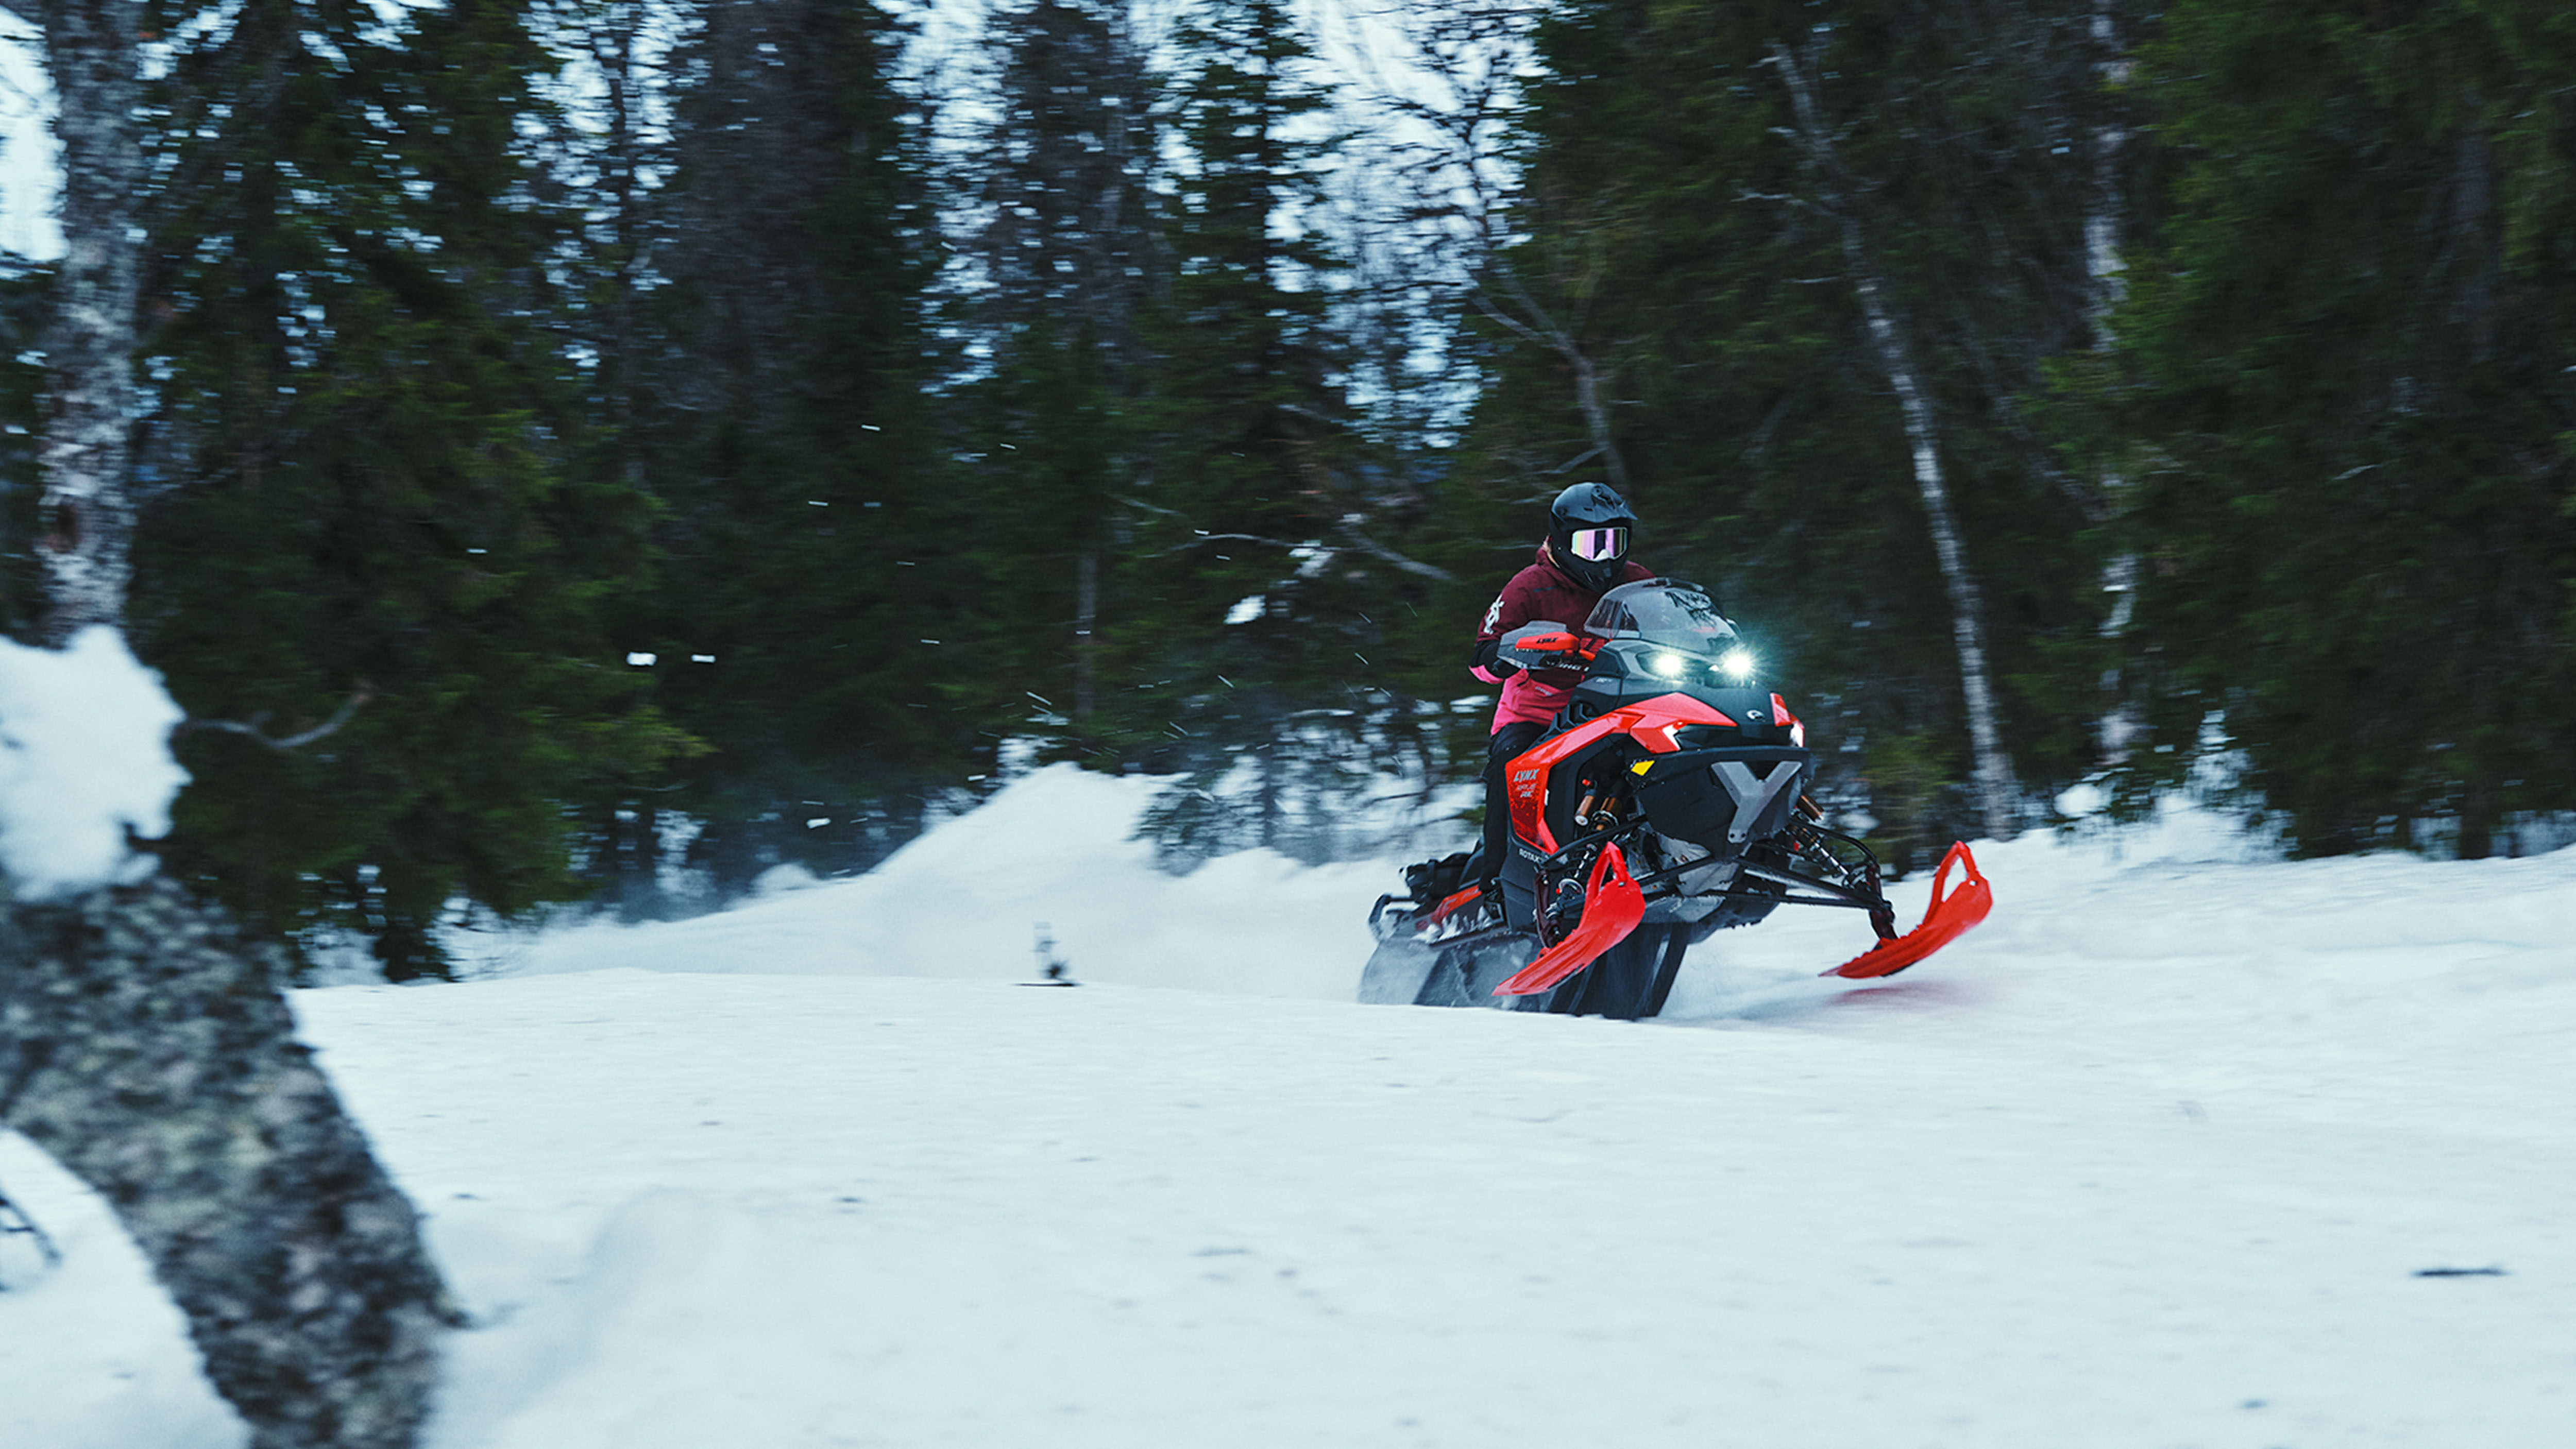 Lynx Rave RE 2025 snowmobile accelerating on trail